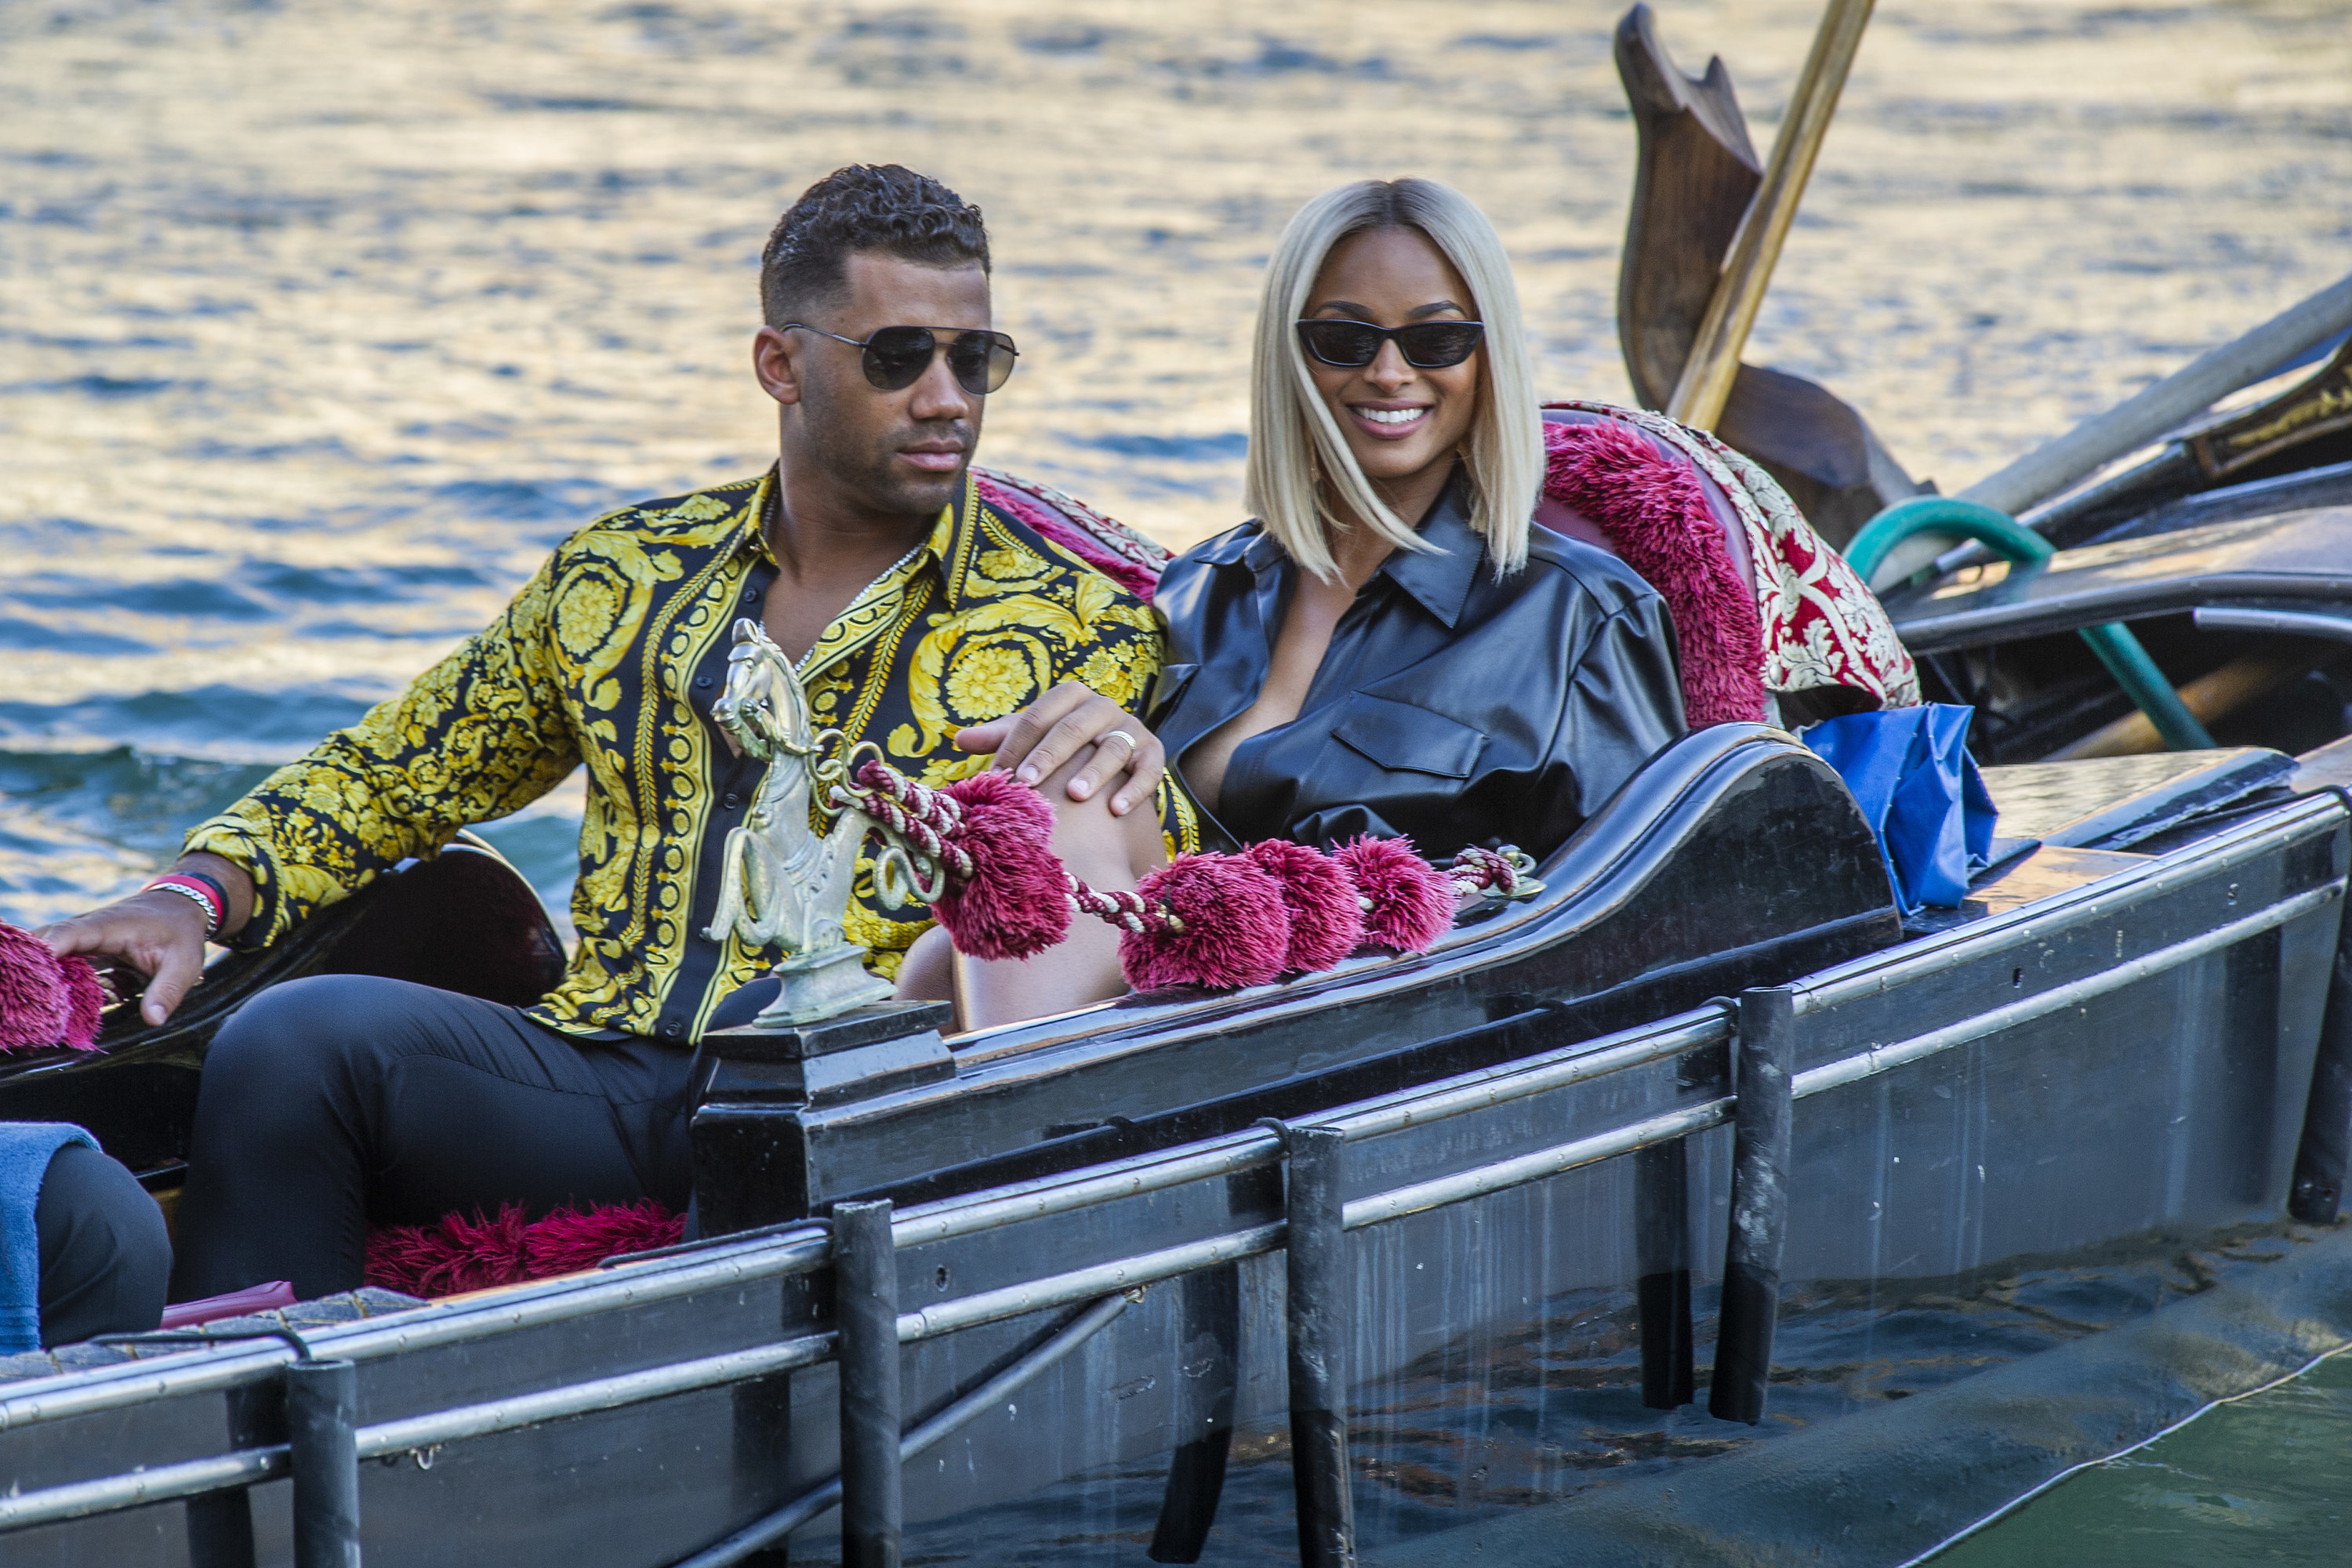 Russell Wilson and Ciara are seen during a gondola tour on the Grand Canal on July 01, 2021, in Venice, Italy